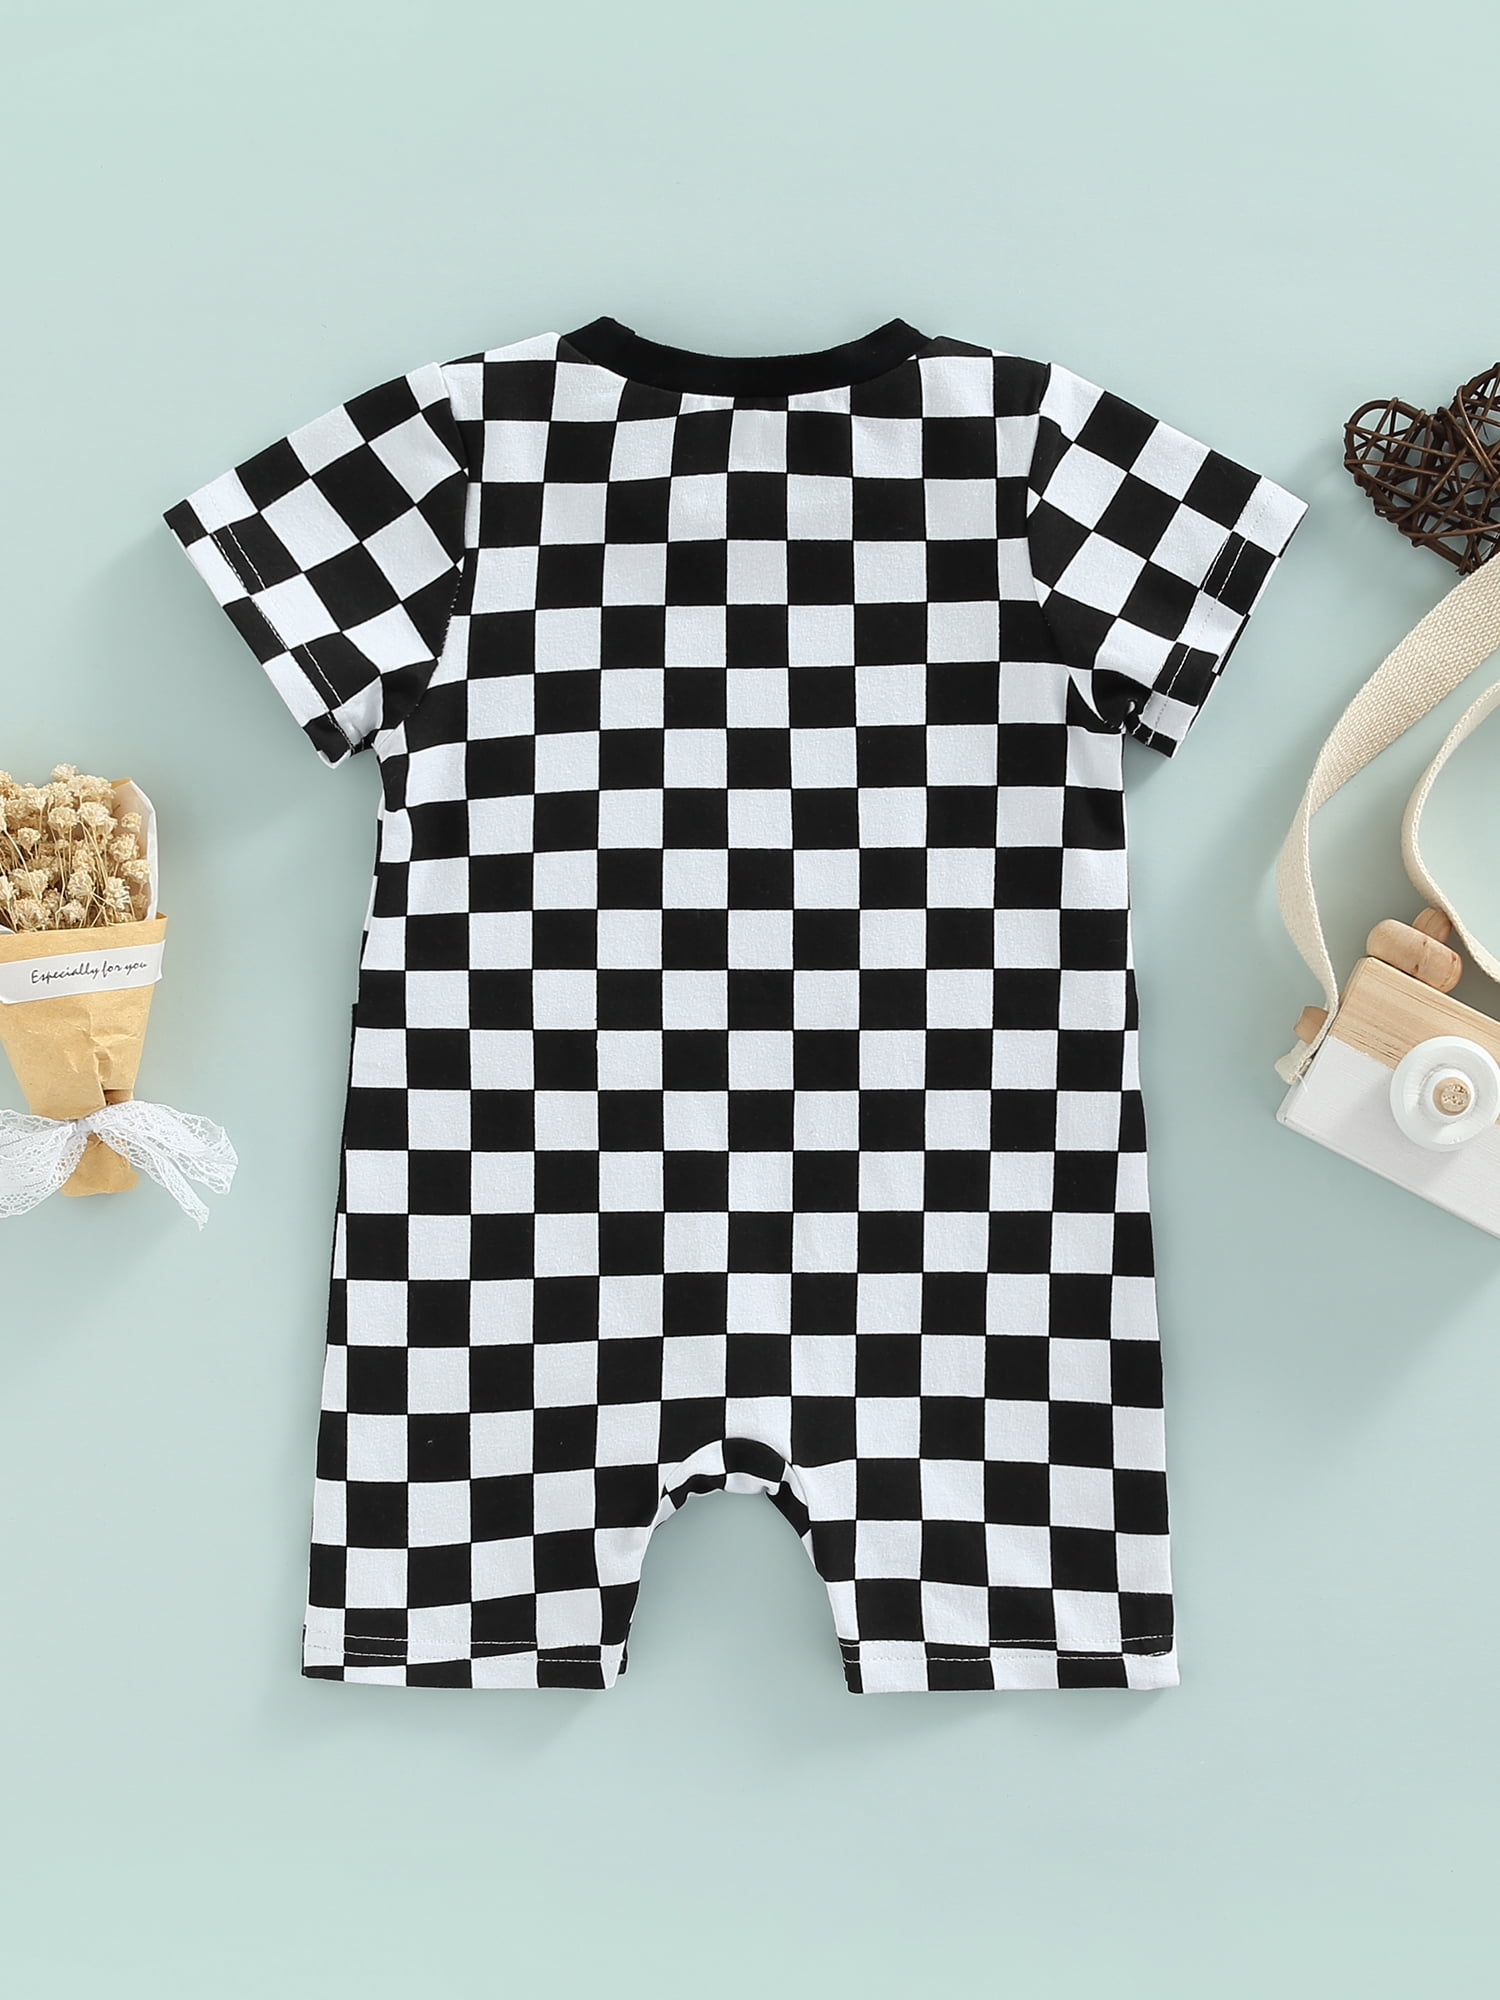 Newborn Baby Boys Jumpsuit Checkerboard Plaid Print Short Sleeve Romper  Bodysuit Playsuit Outfit Summer Clothes